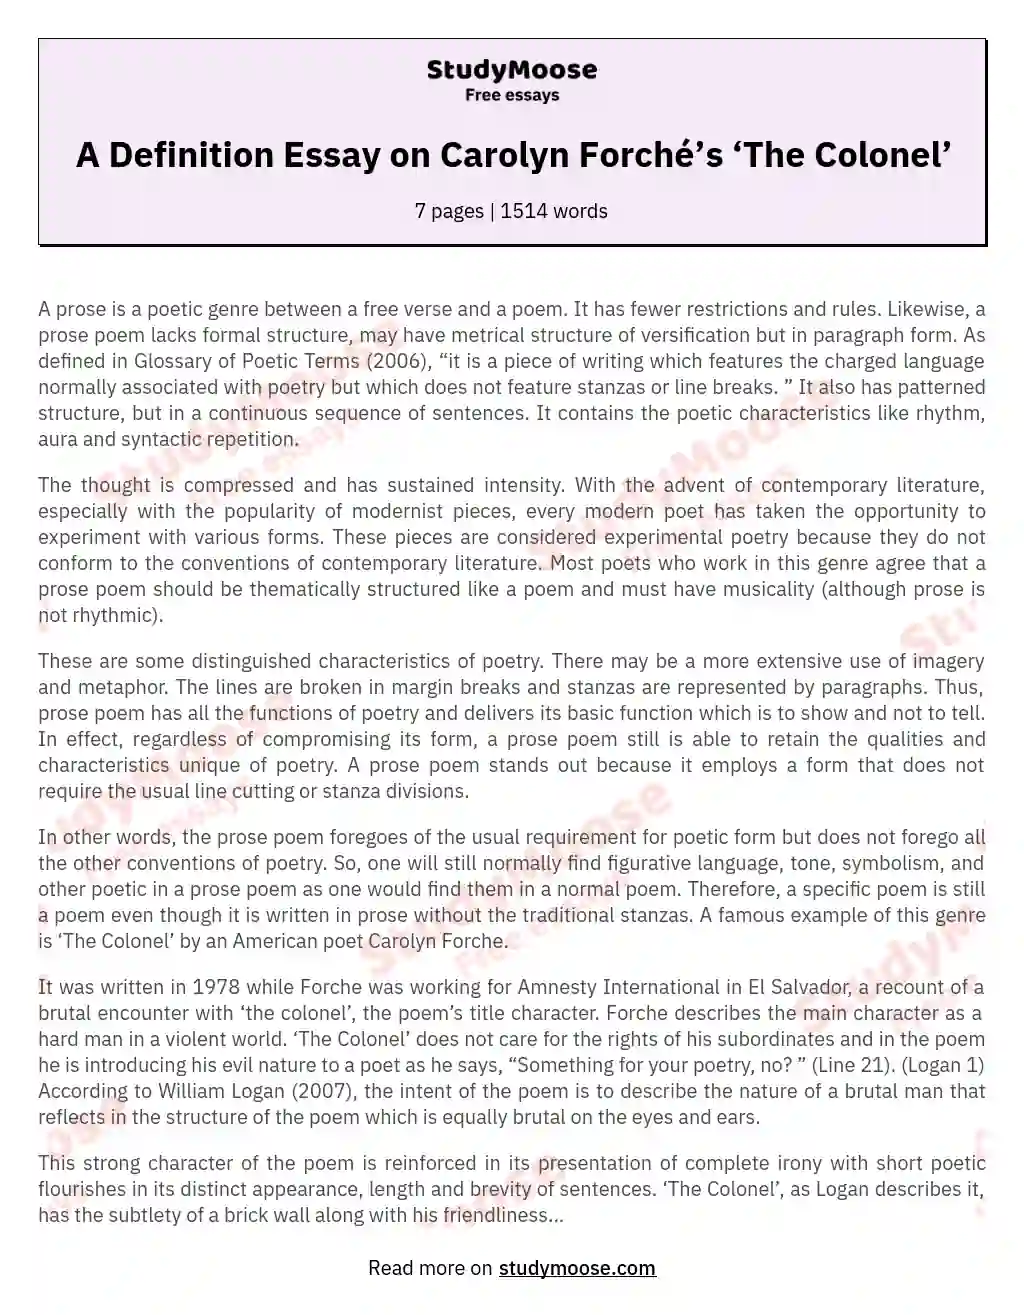 A Definition Essay on Carolyn Forché’s ‘The Colonel’ essay